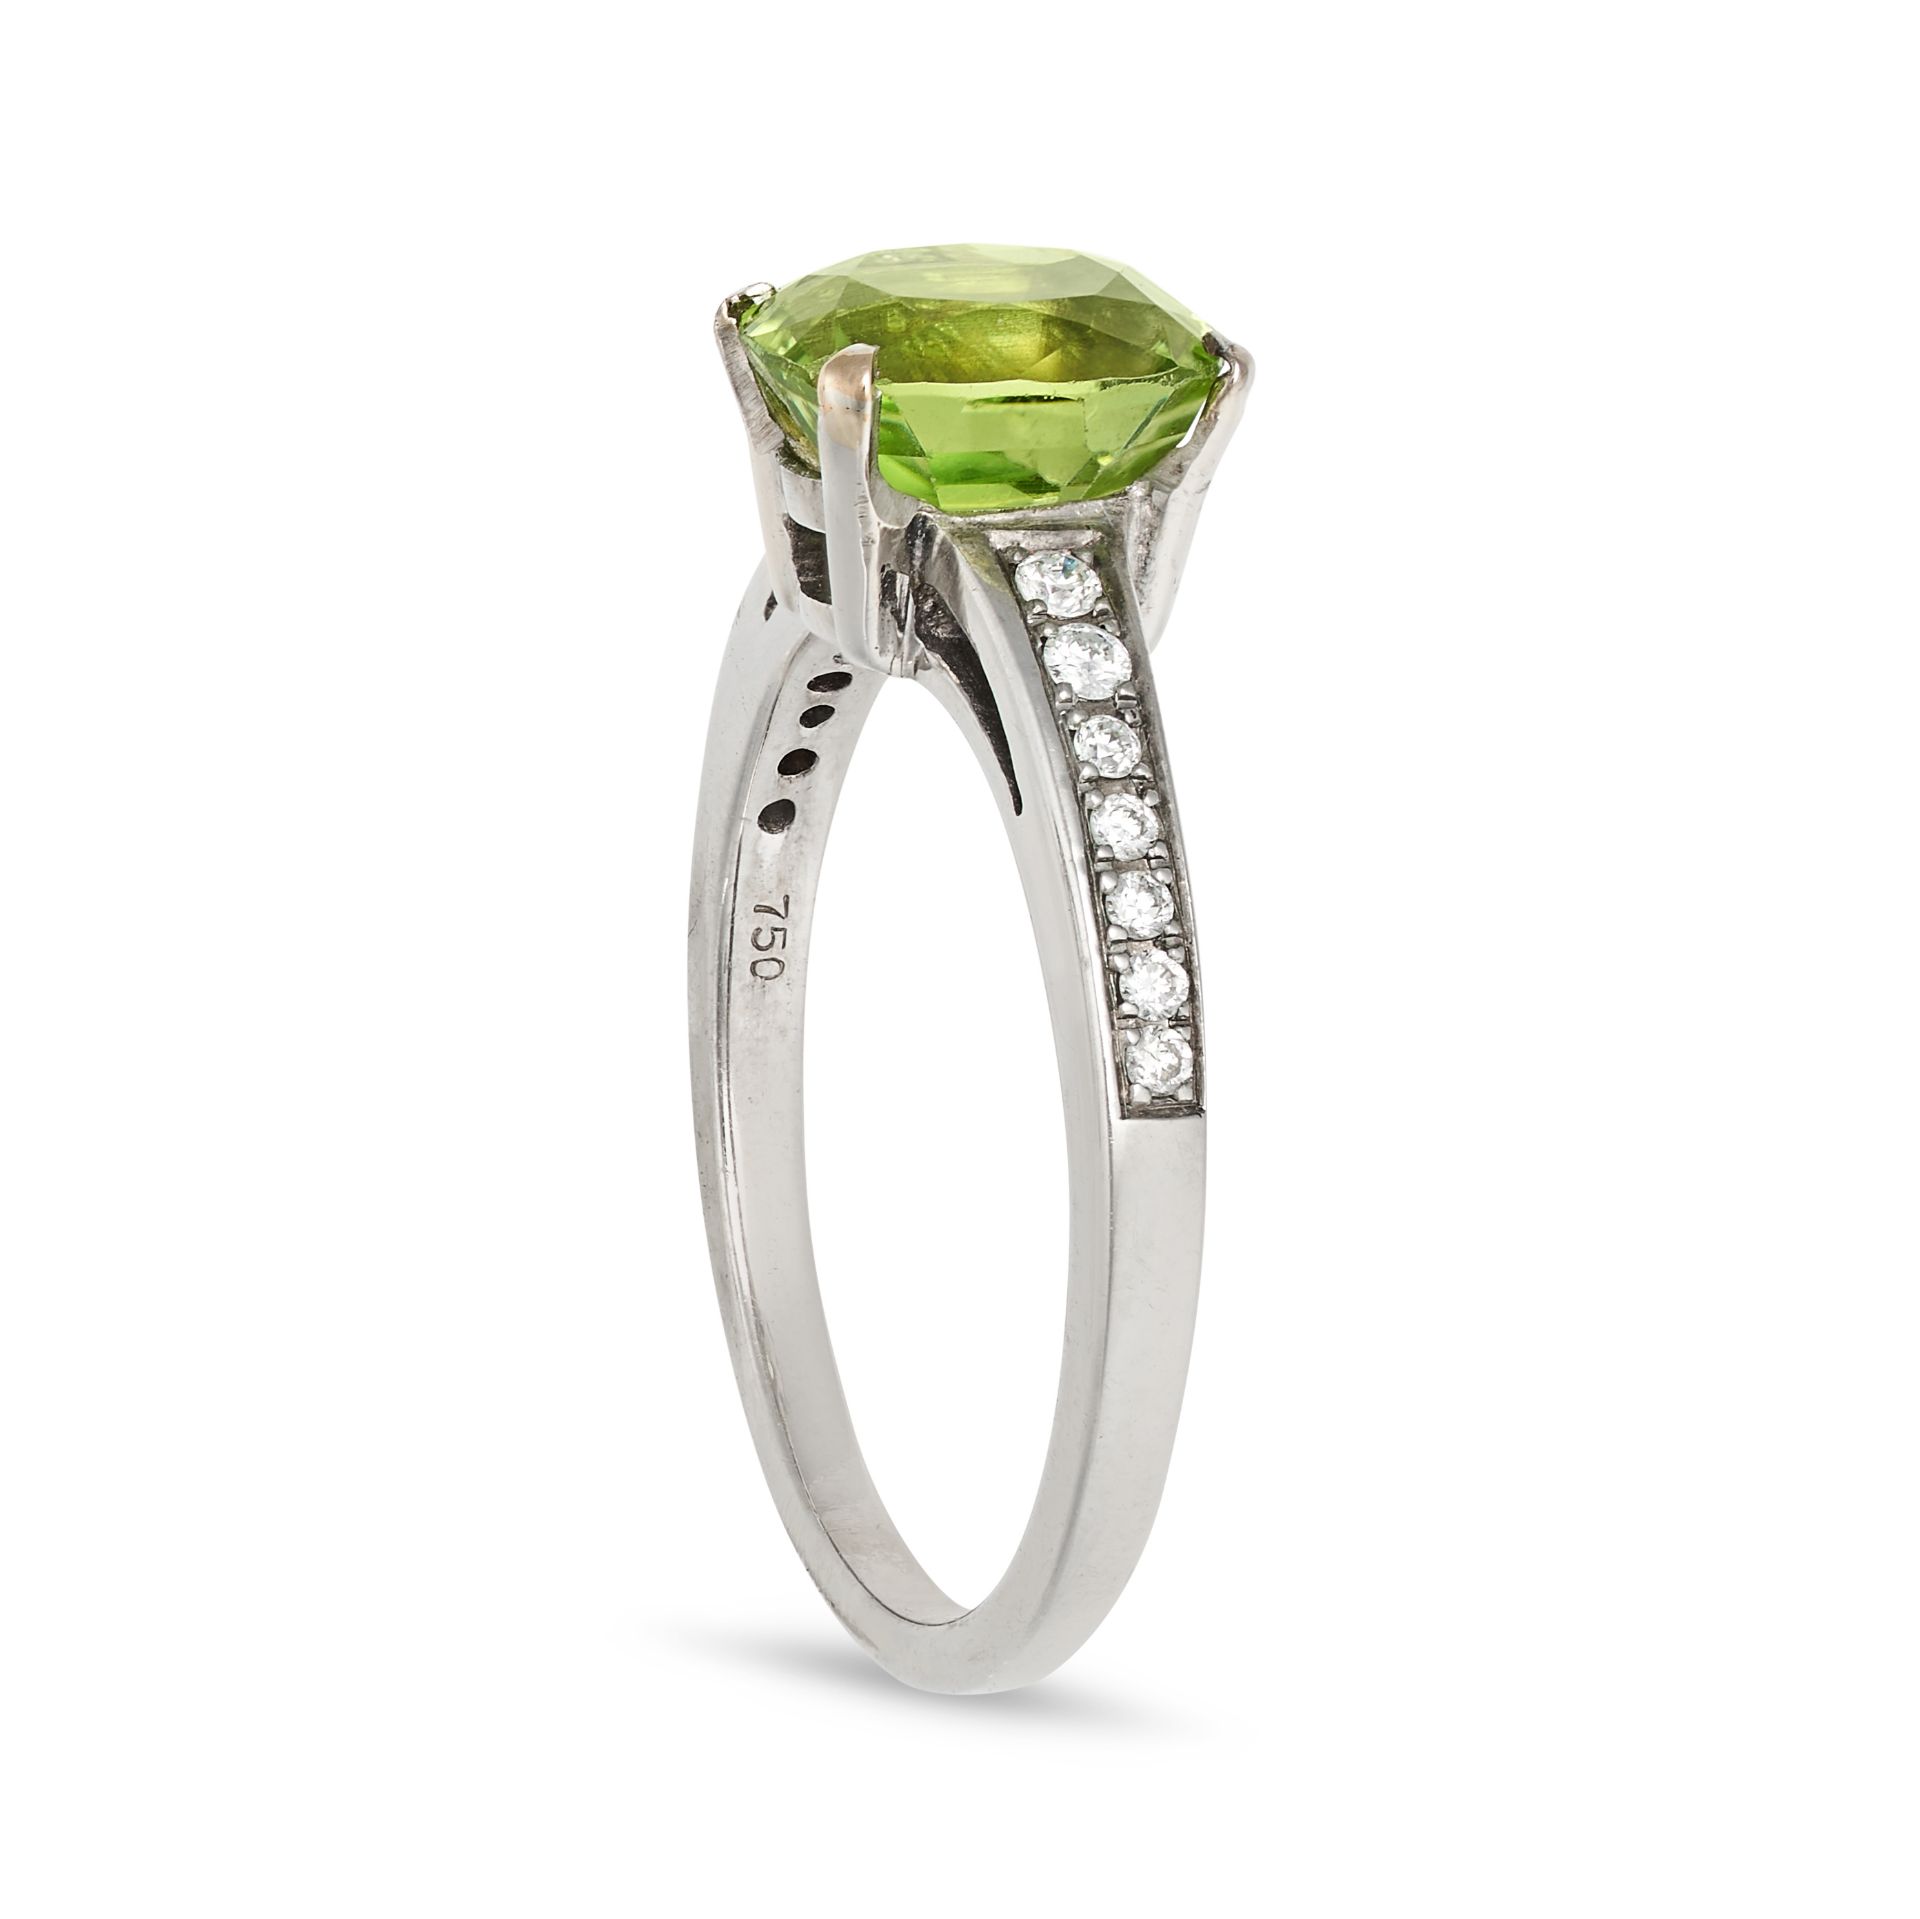 A PERIDOT AND DIAMOND RING in 18ct white gold, set with a cushion cut peridot of approximately 2.... - Image 2 of 2